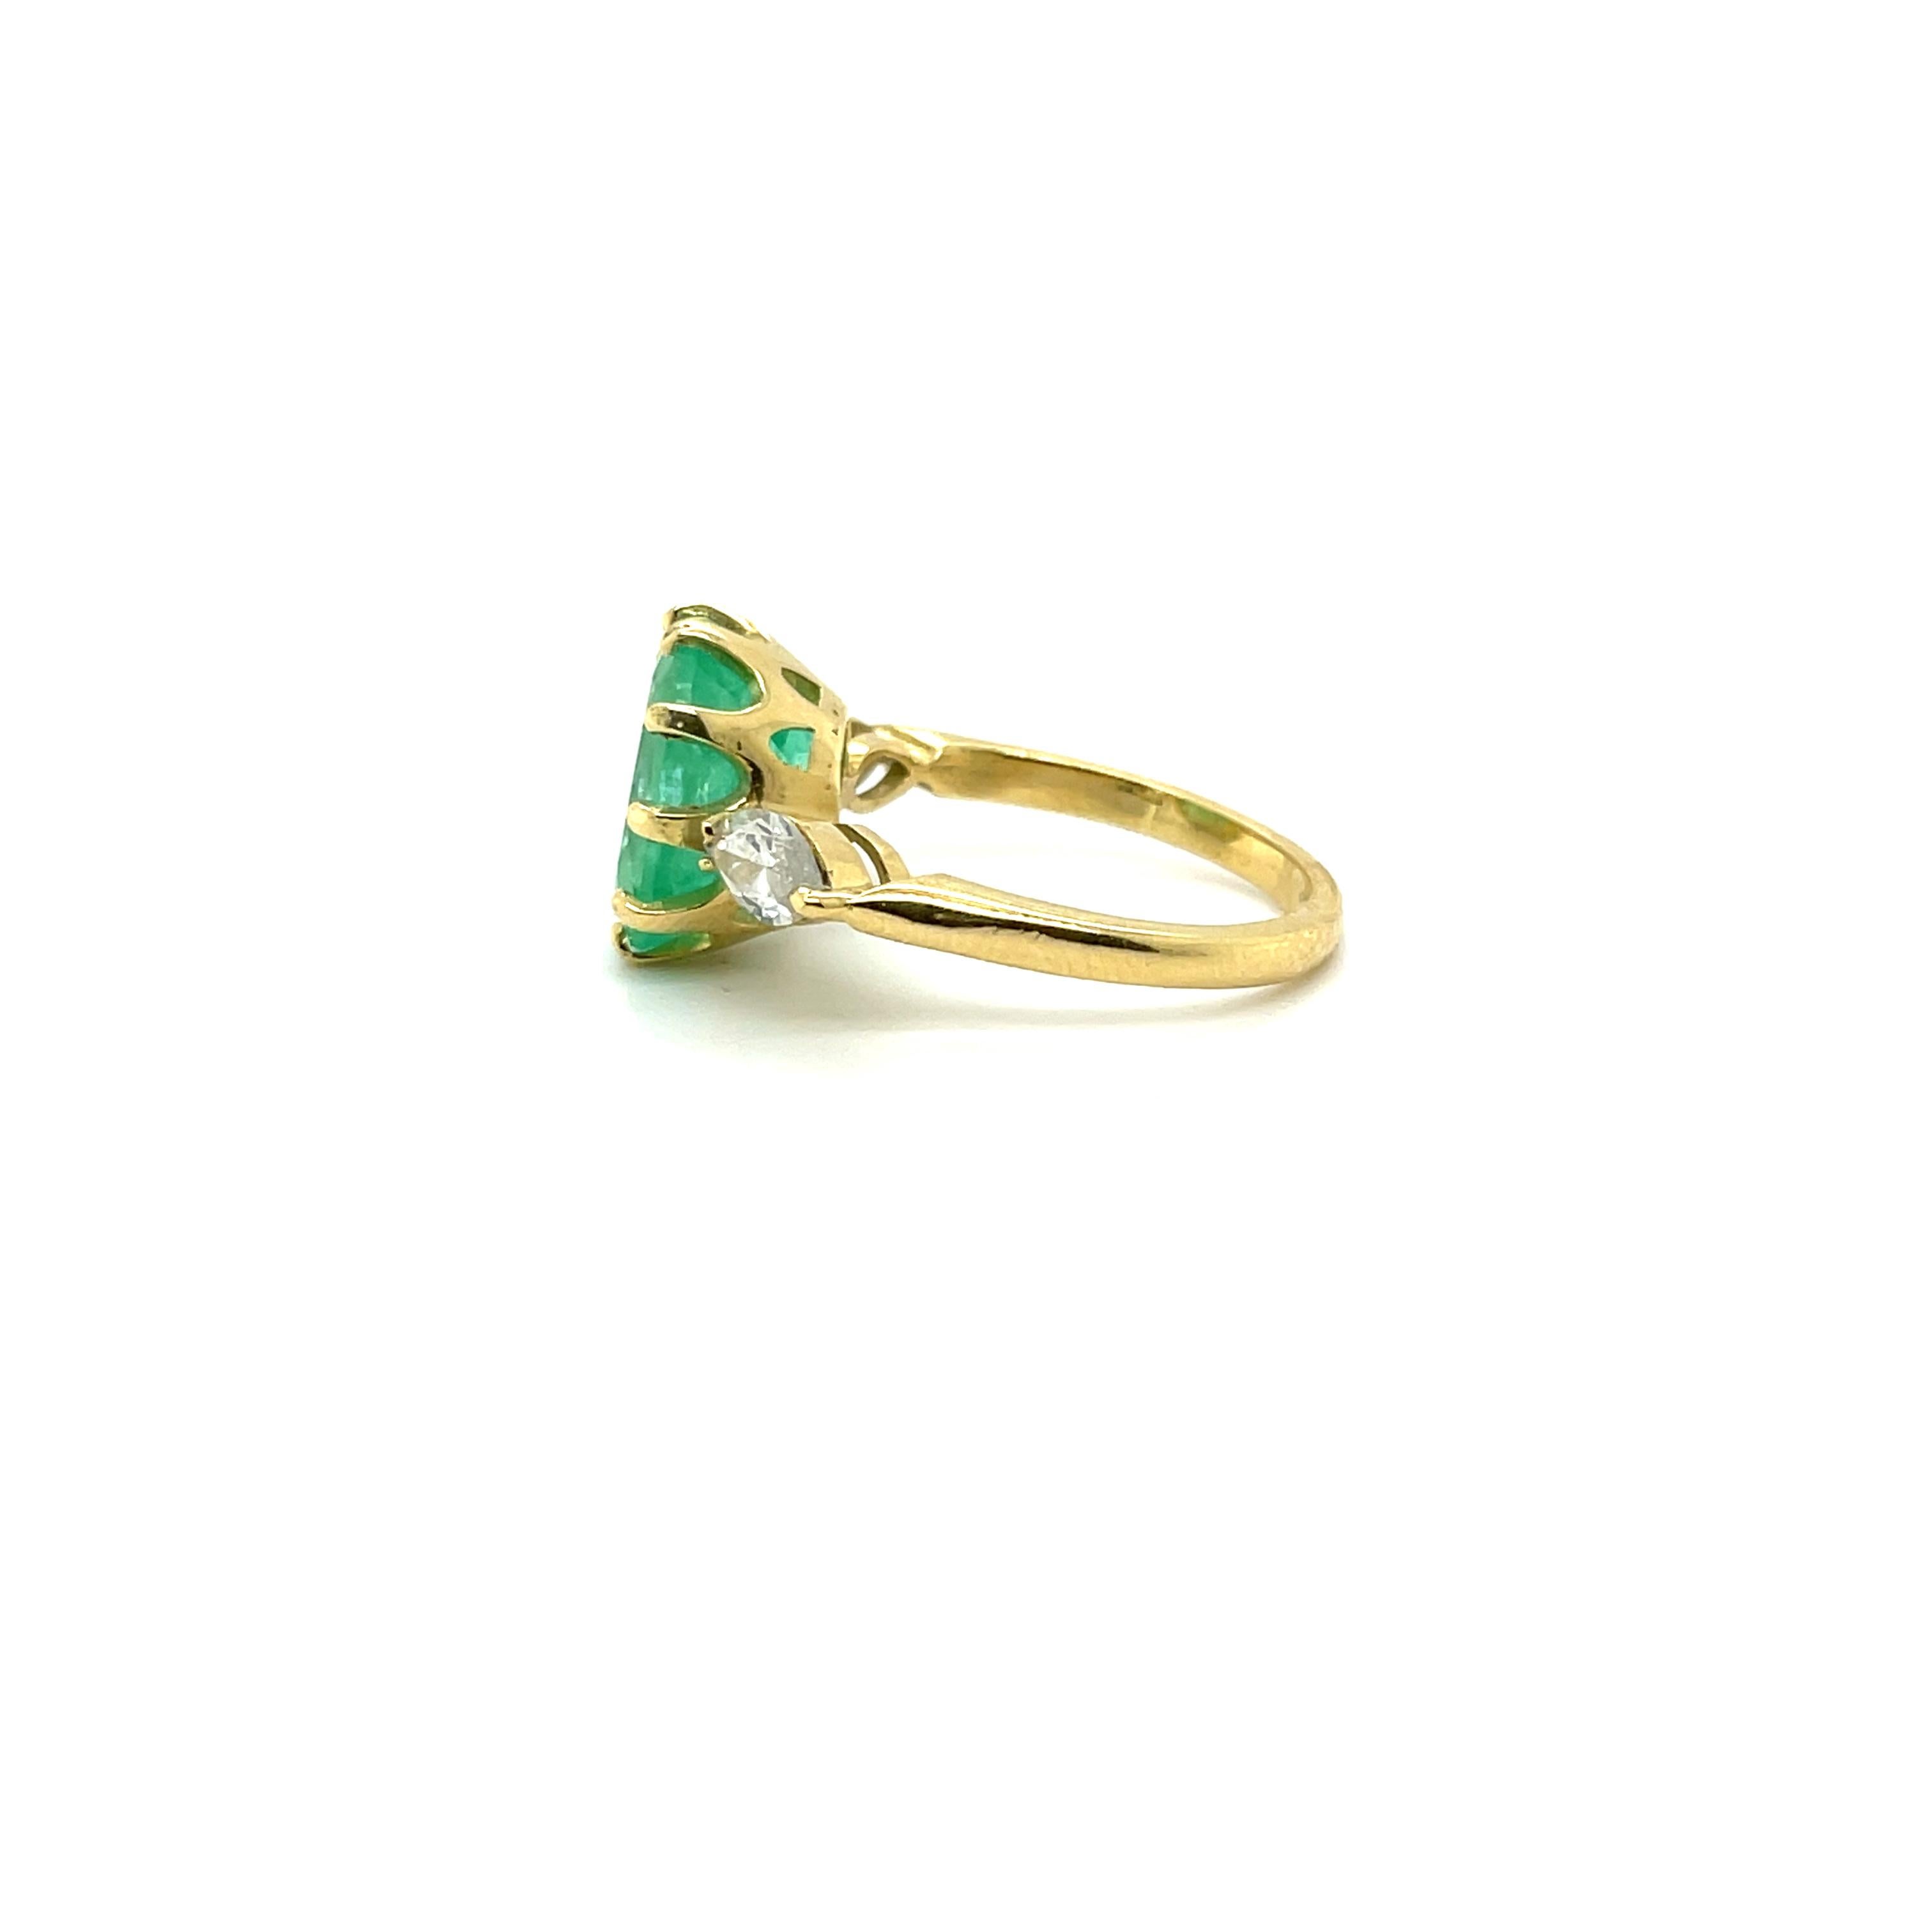 Gorgeous Emerald and Diamond trilogy ring , stunningly crafted in eighteen karat yellow gold , complimented by a beautiful polished finish design. 


One ladies - 18ct yellow gold dress ring, narrow, half round shank with underrail, multi-
claw